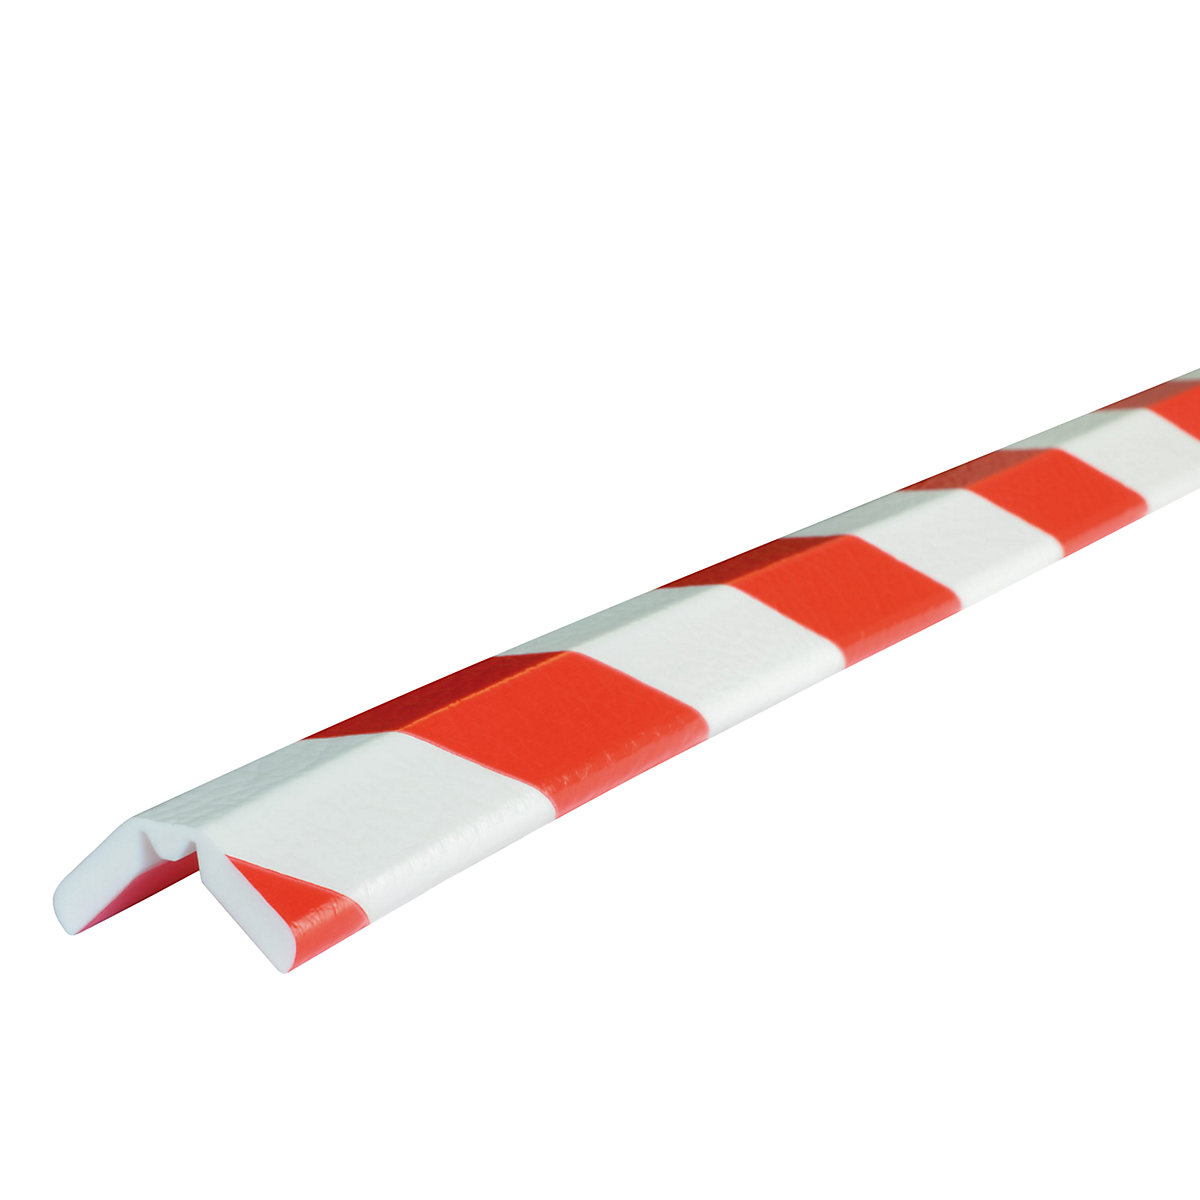 Knuffi® corner protection – SHG, type W, 1 x 5 m roll, red / white-15